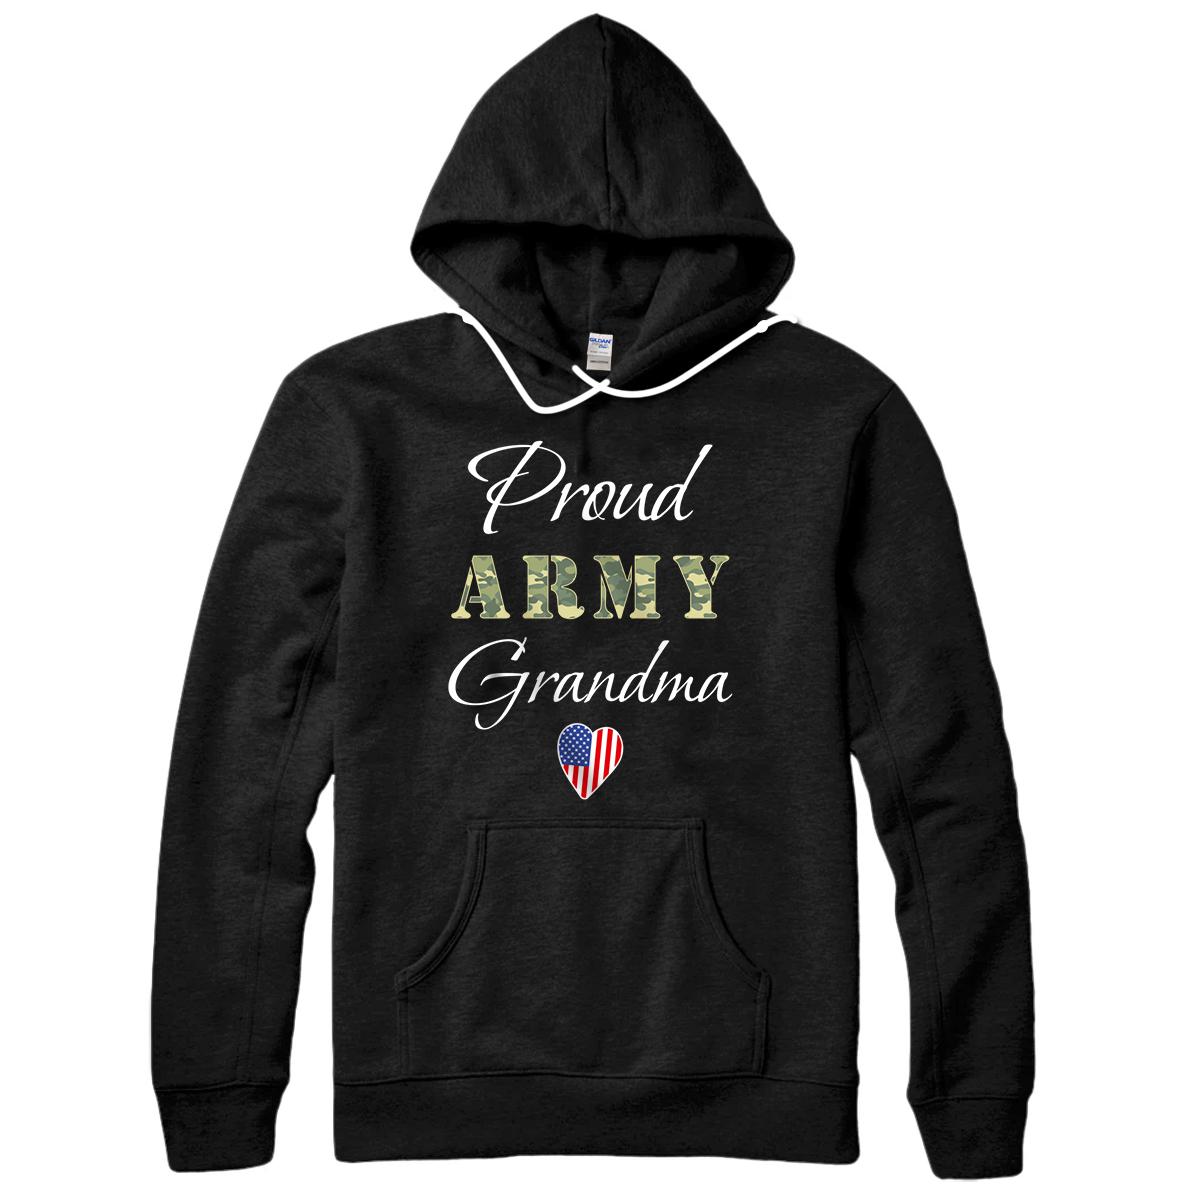 Personalized Army Grandmother Grandson Soldier For Proud Army Grandma Pullover Hoodie